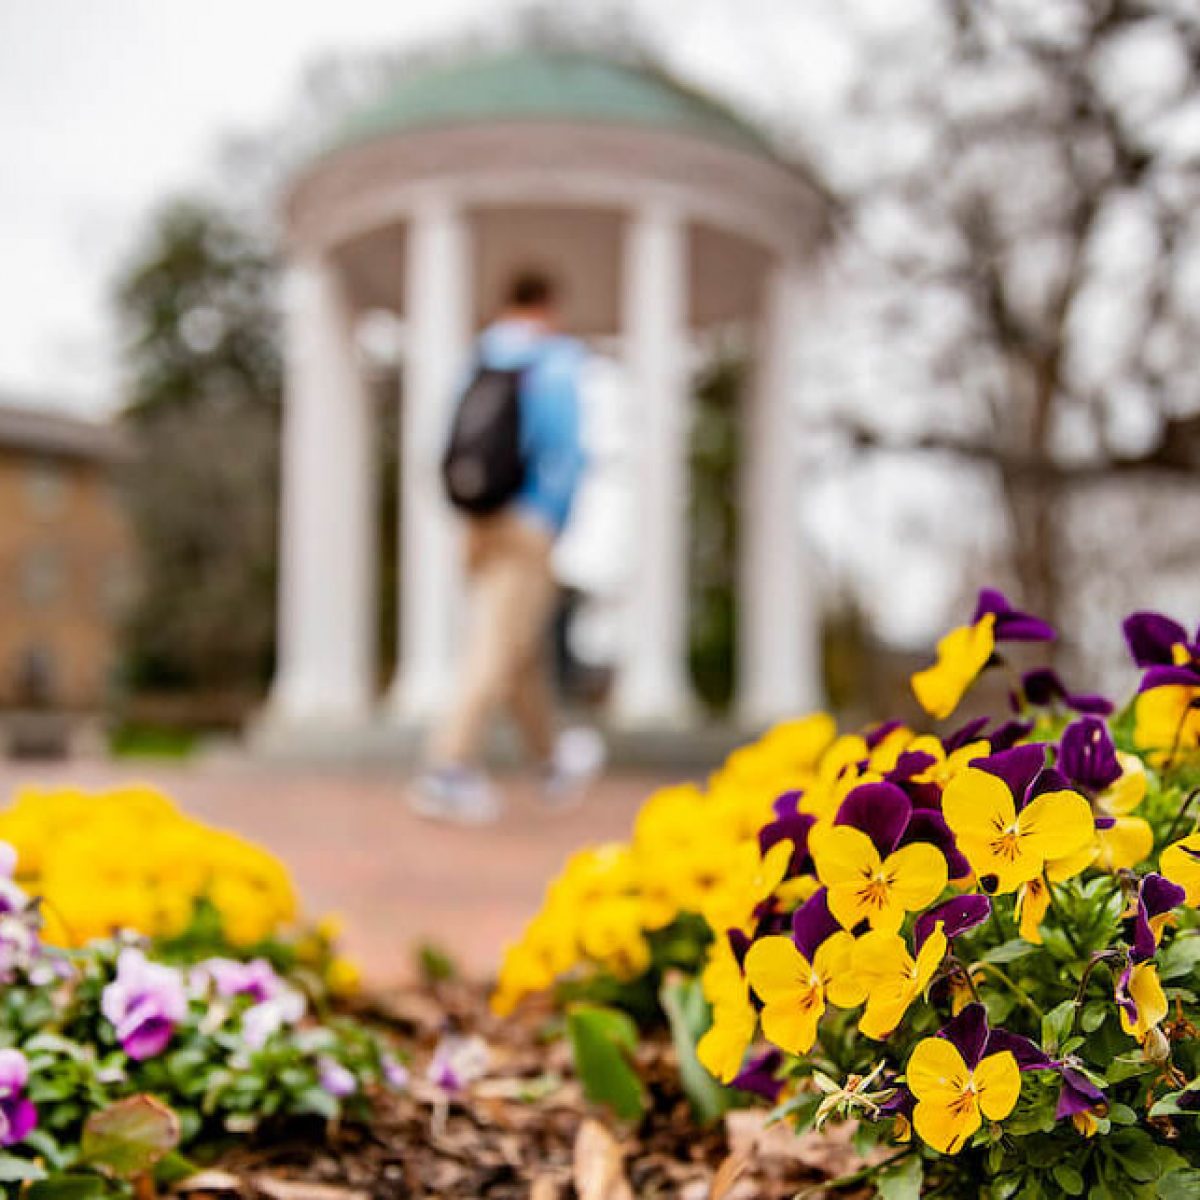 Student walks in front of the Old Well on the campus of UNC-Chapel Hill